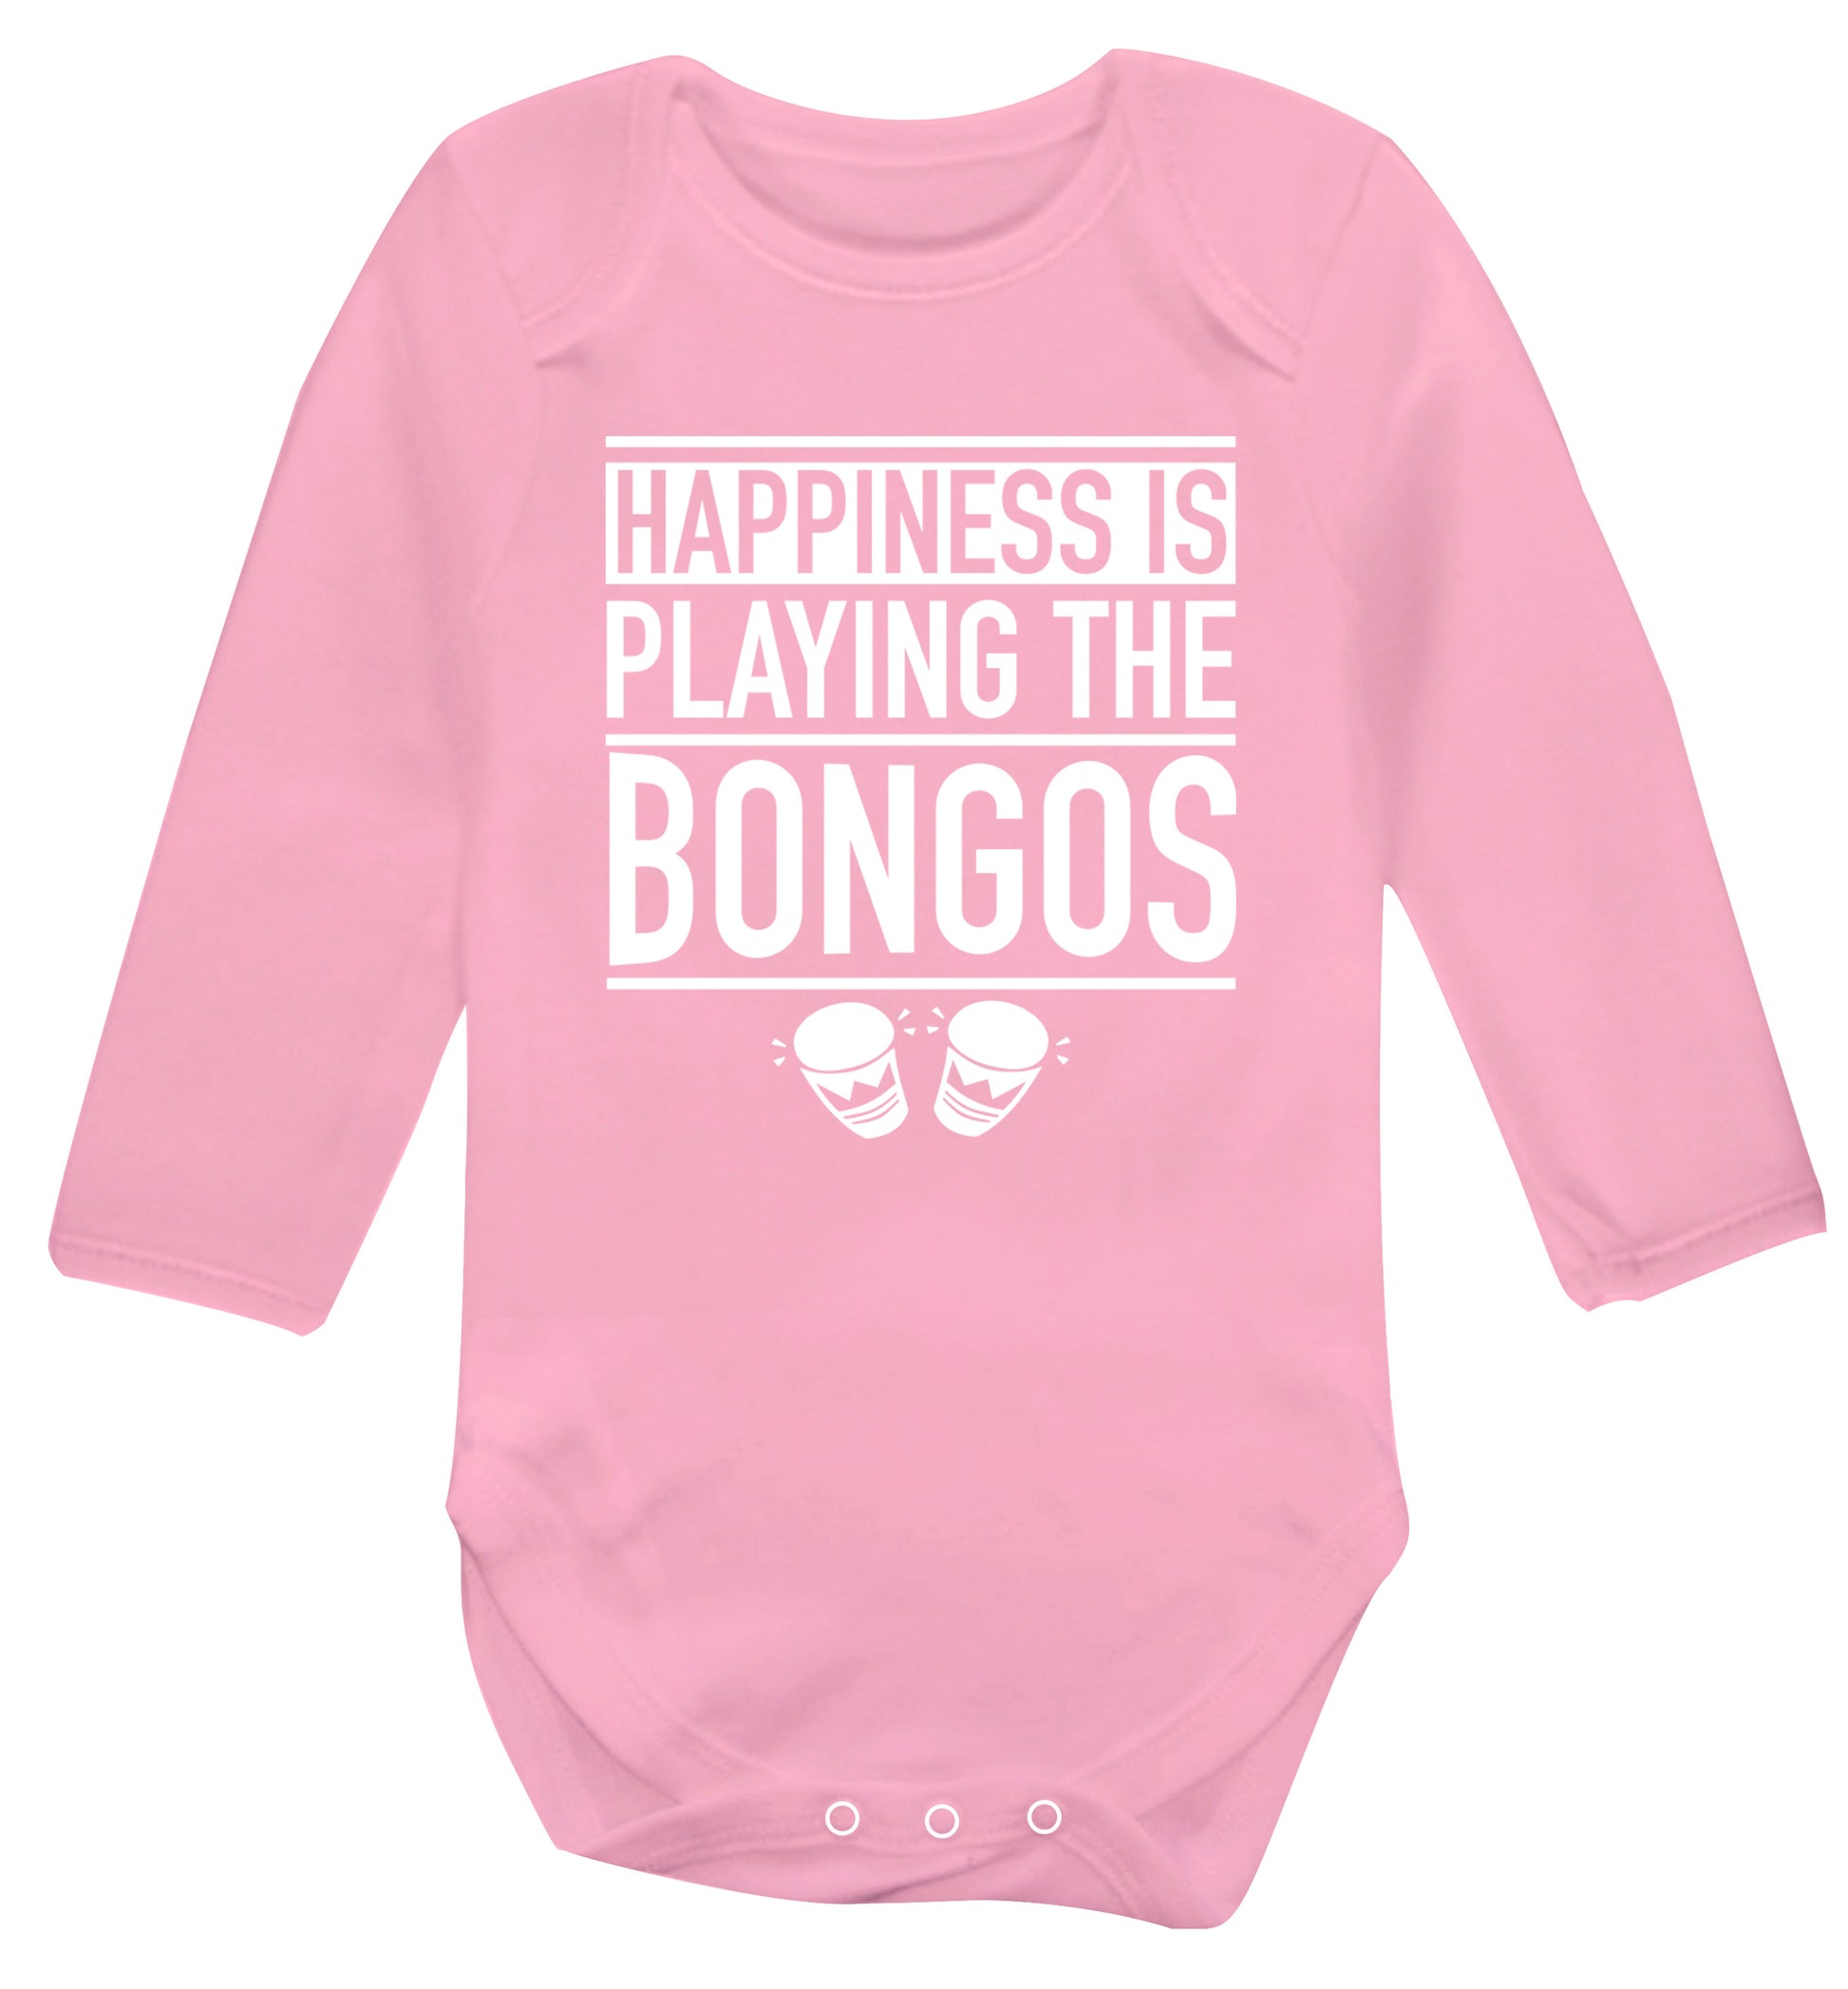 Happiness is playing the bongos Baby Vest long sleeved pale pink 6-12 months